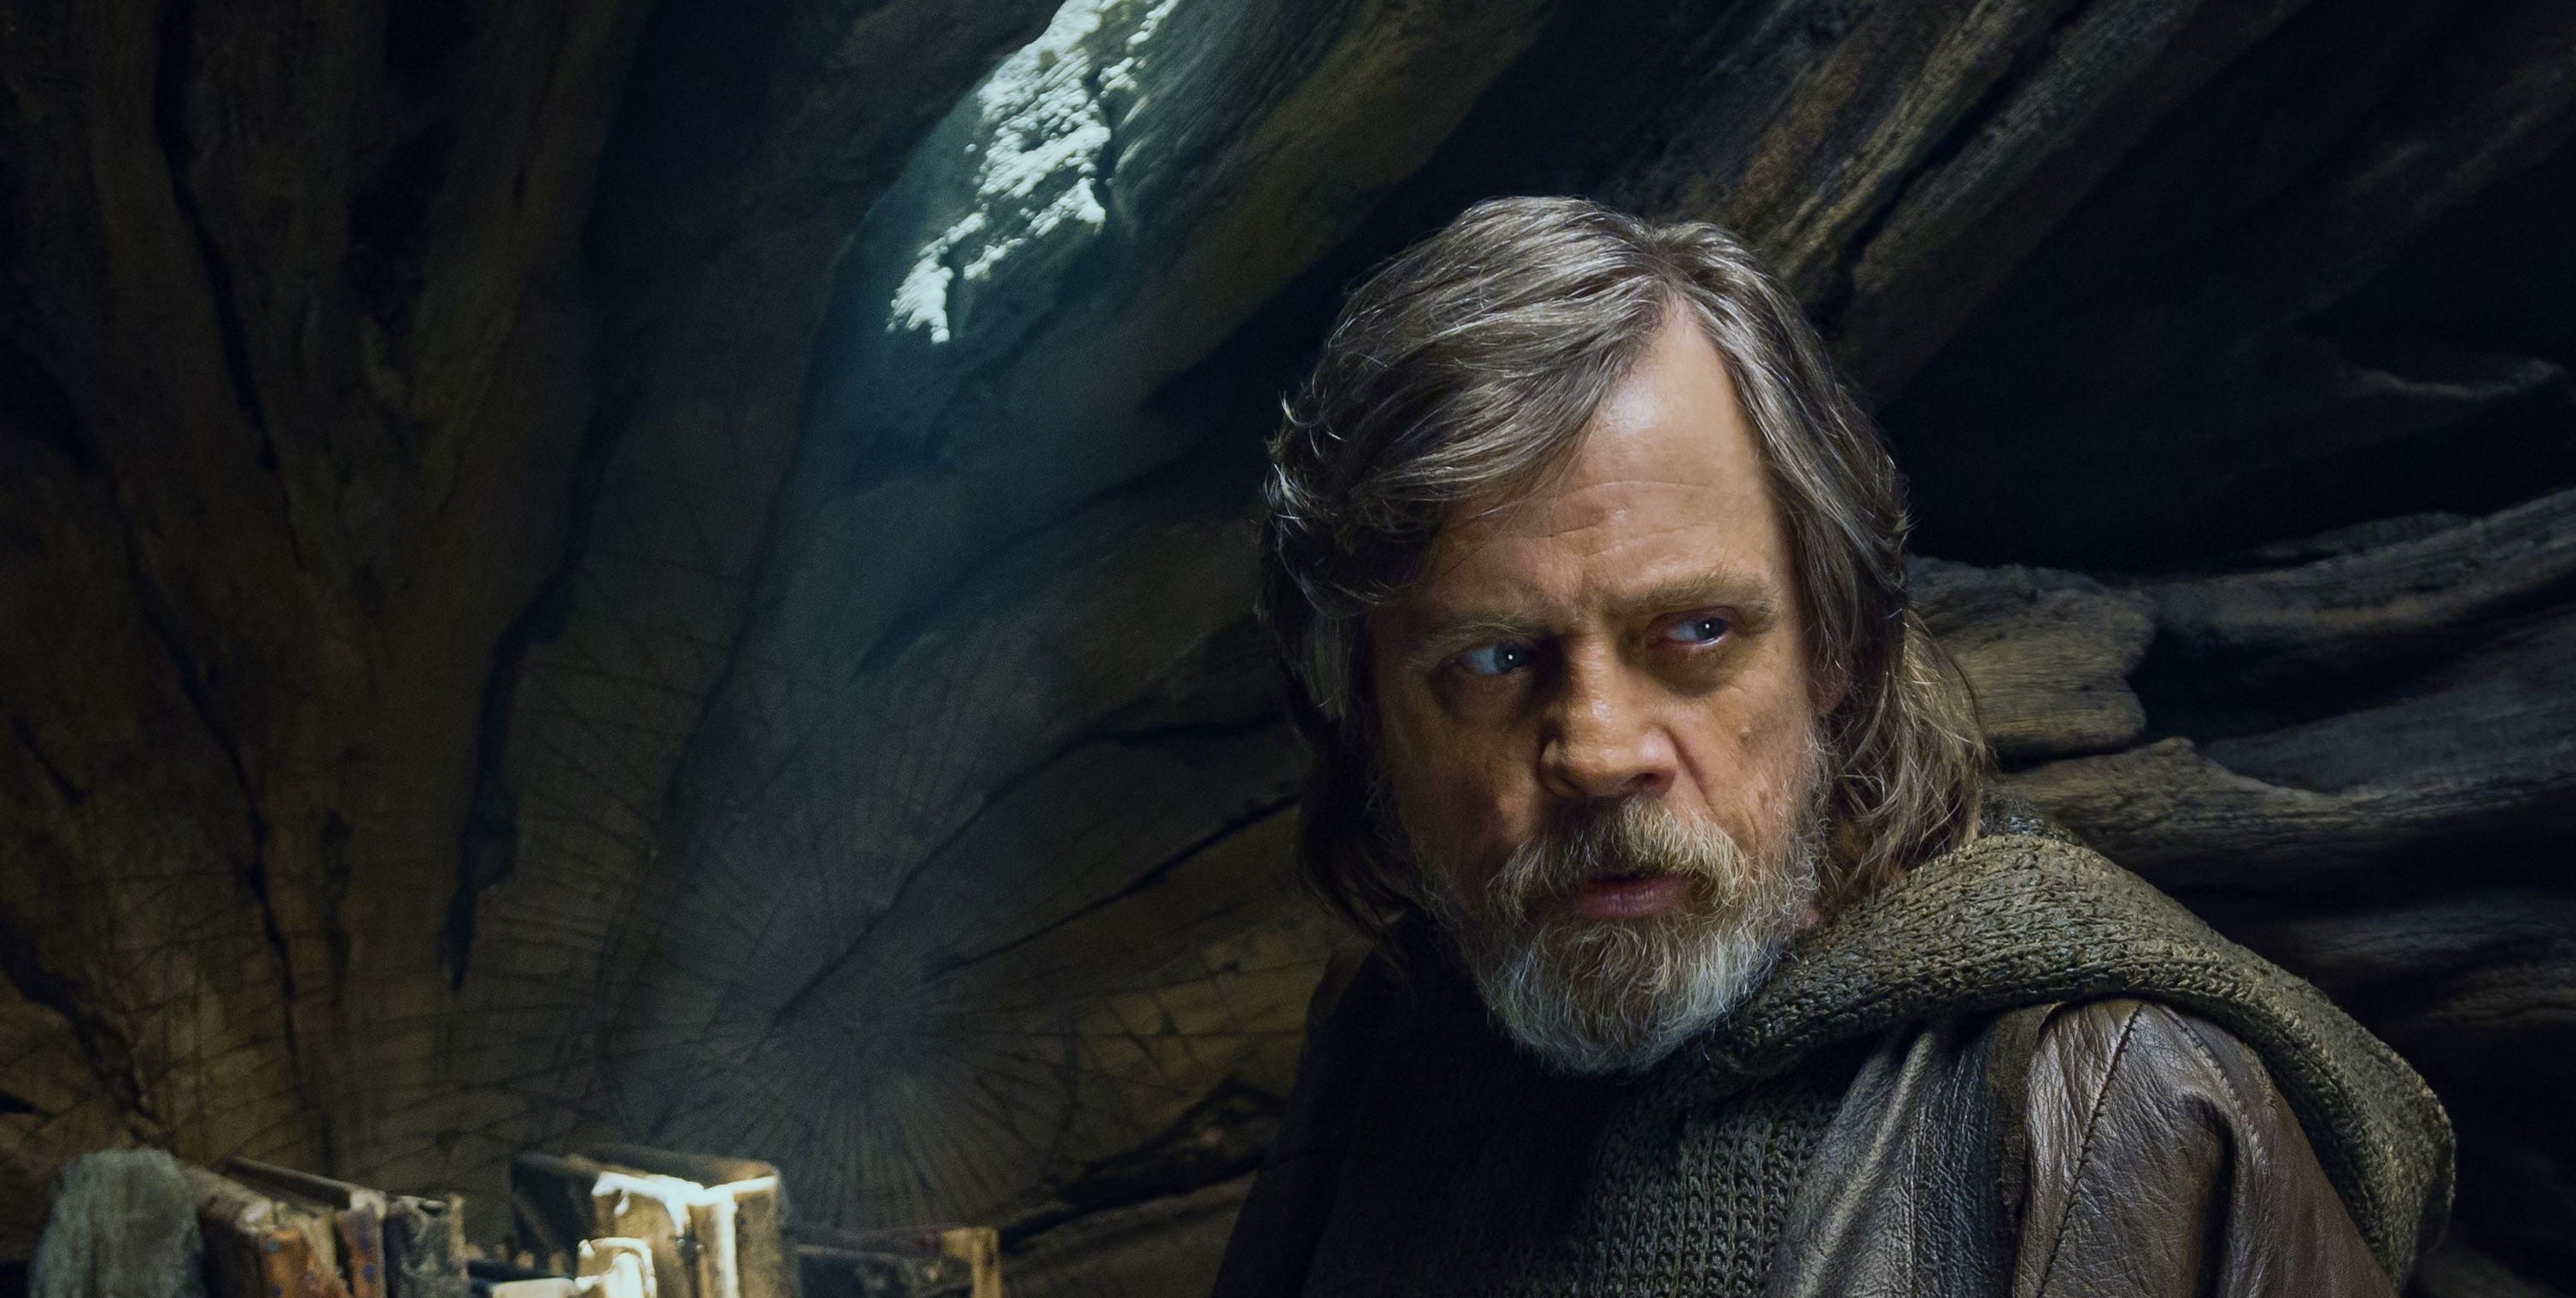 Star Wars Editor Criticizes The Last Jedi for Trying to 'Undo' Trilogy